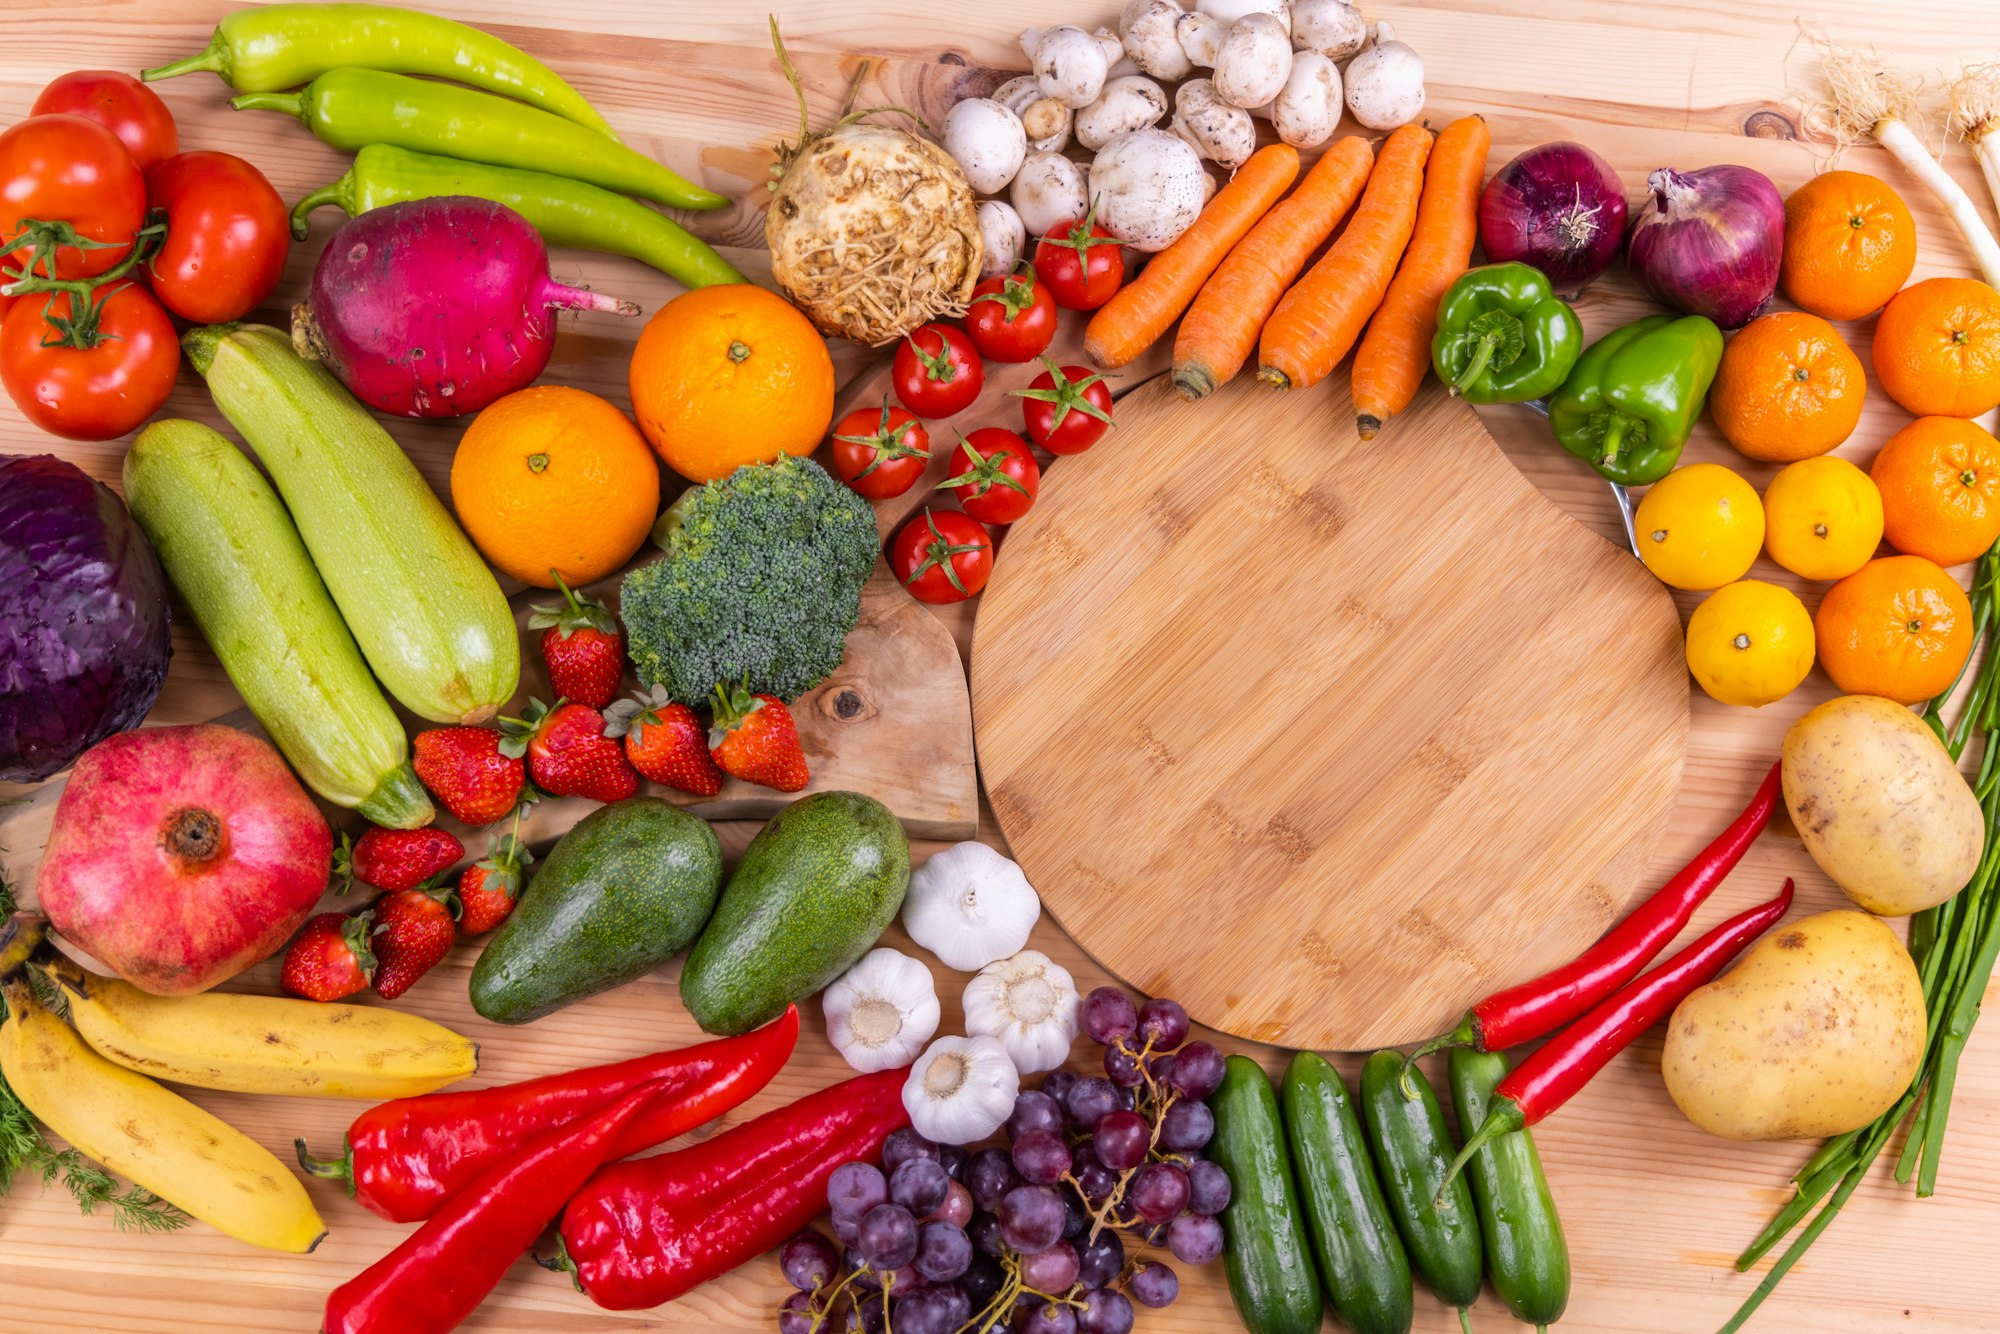 Which vegetables have the most vitamins?